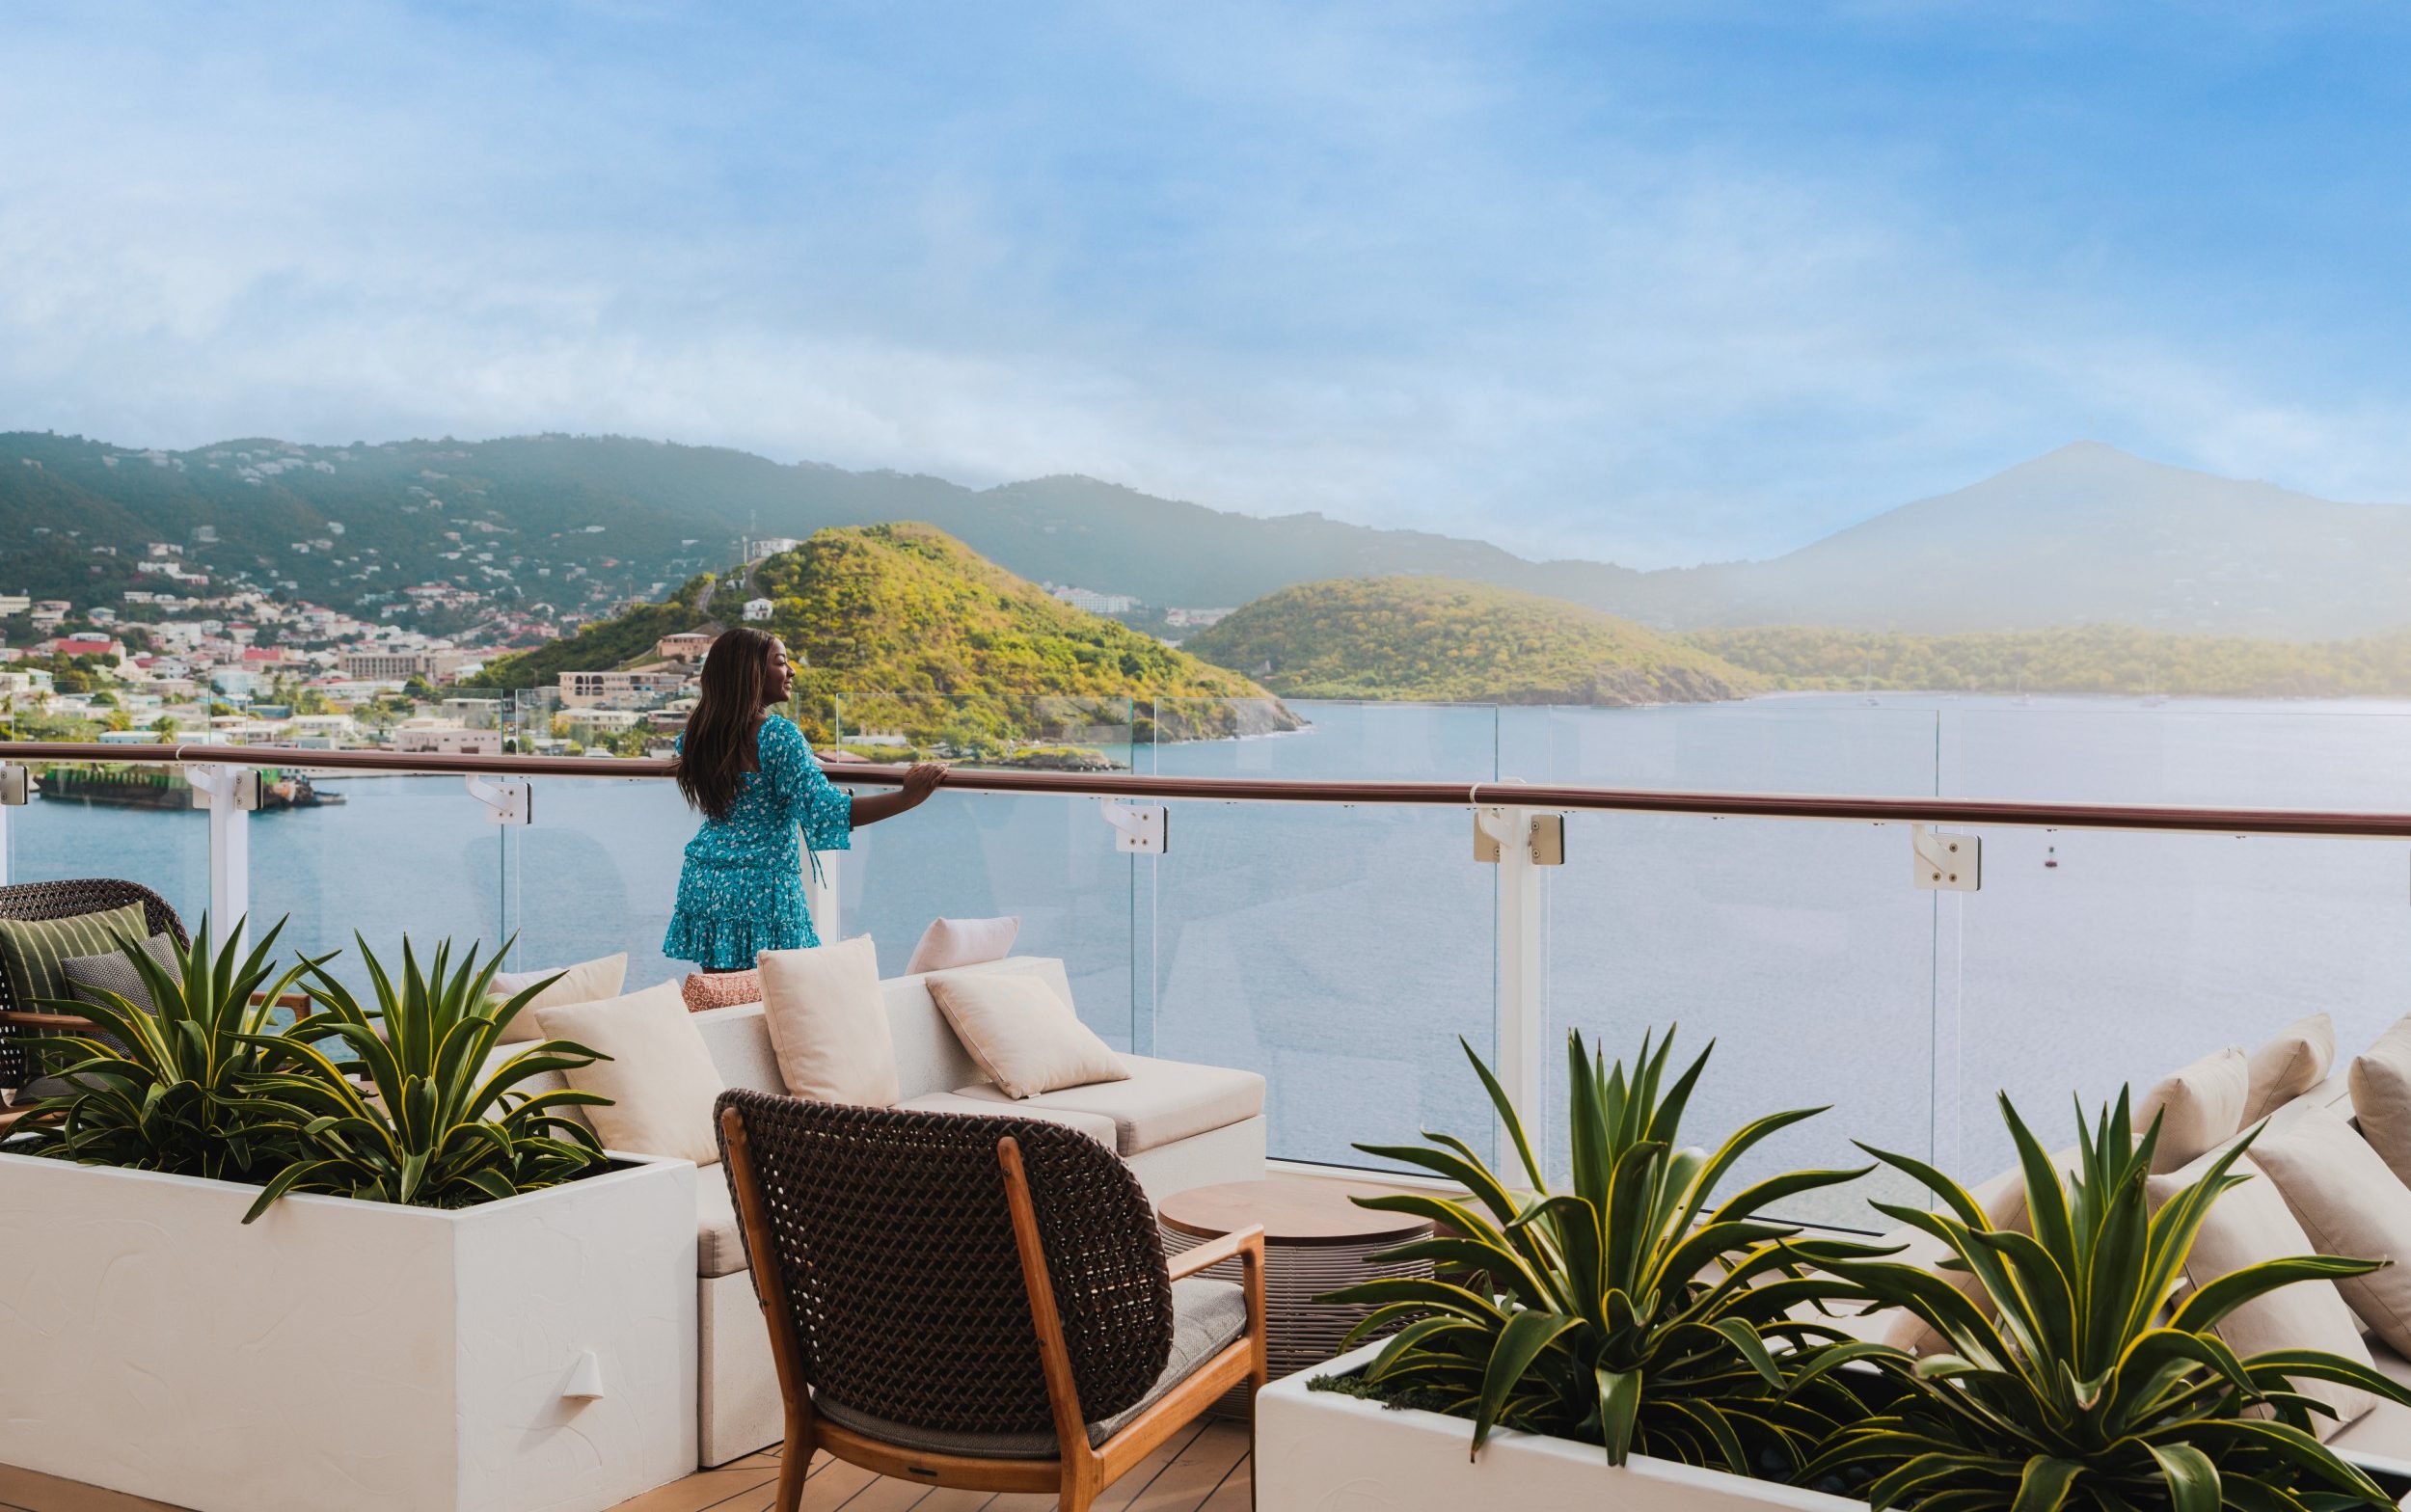 10 best caribbean cruises – and which one is right for you this winter